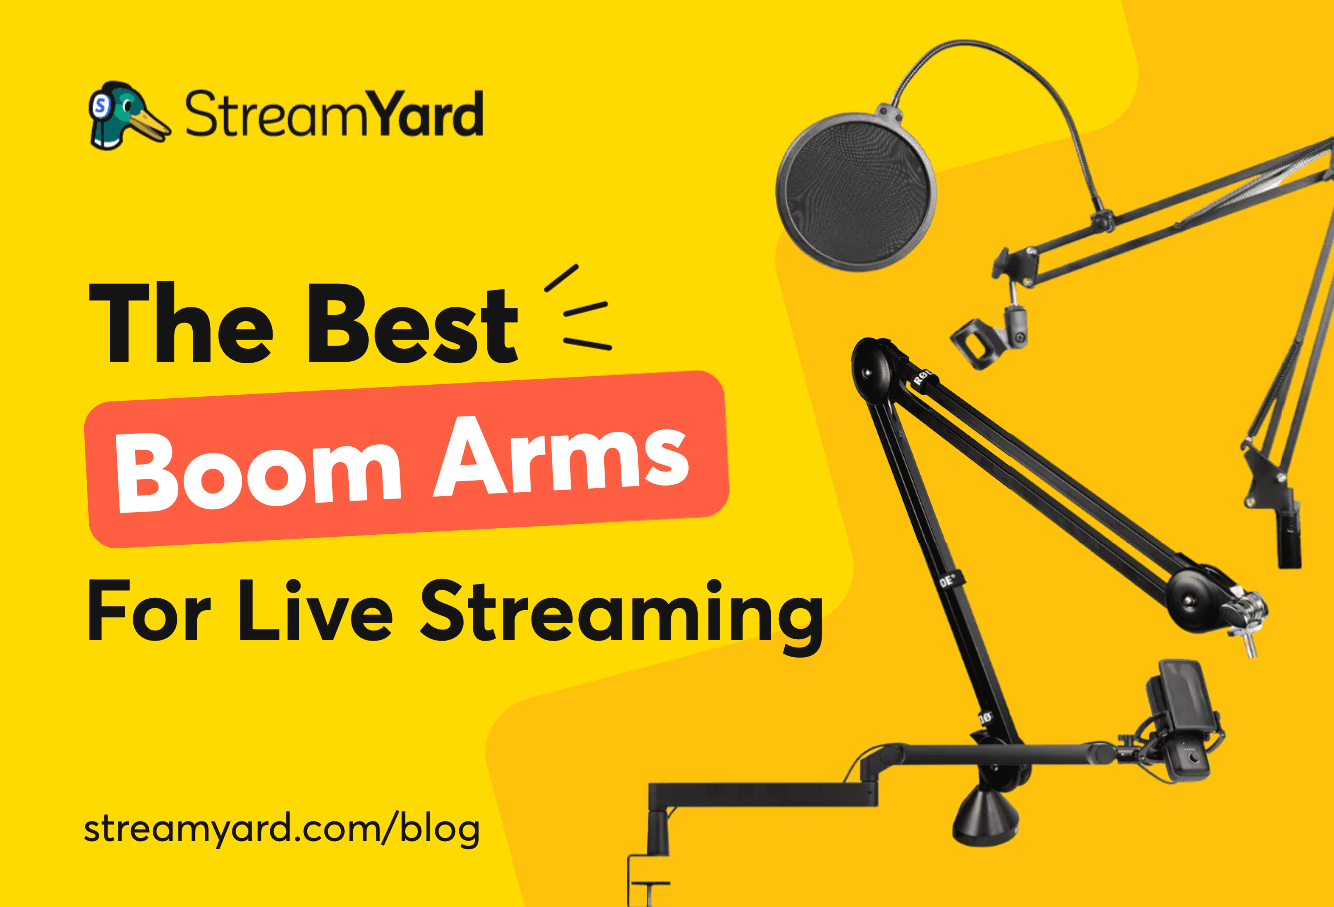 Struggling to keep your microphone in place as you go live? Here are our top 11 picks for the best boom arms for hassle-free live streaming.